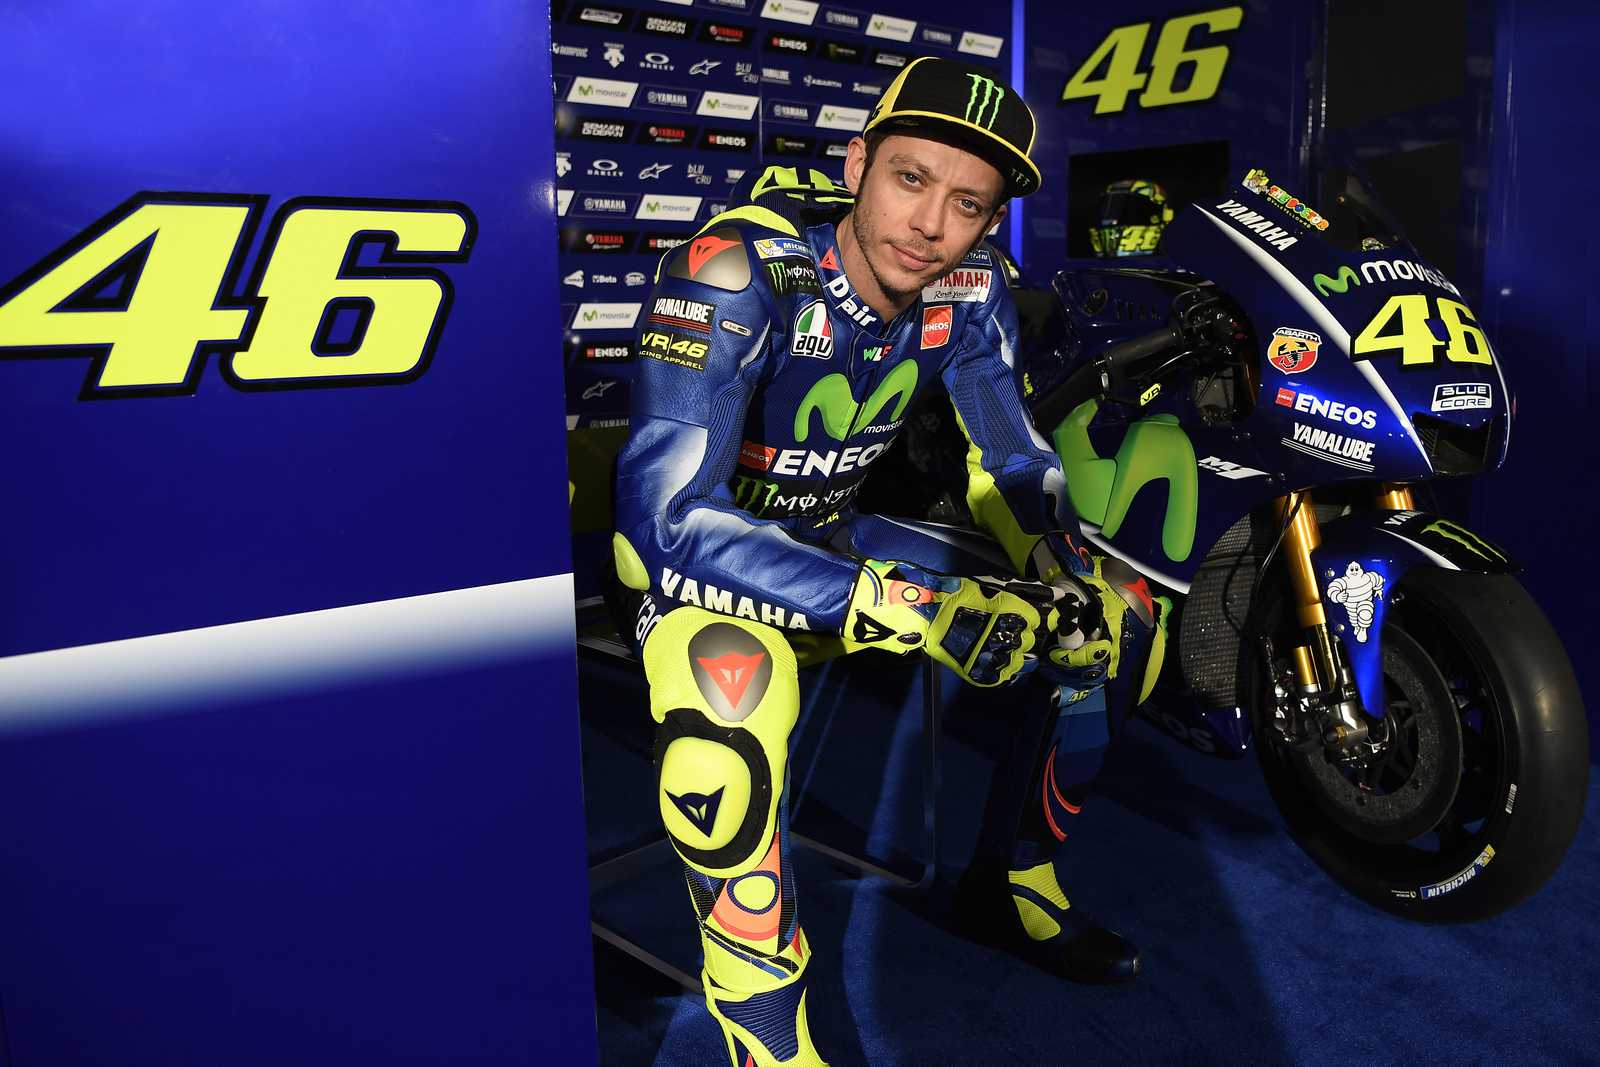 MotoGP: Rossi Says He Is In "Severe Pain" Following Motocross Accident - Roadracing World Magazine Motorcycle Riding, Racing & Tech